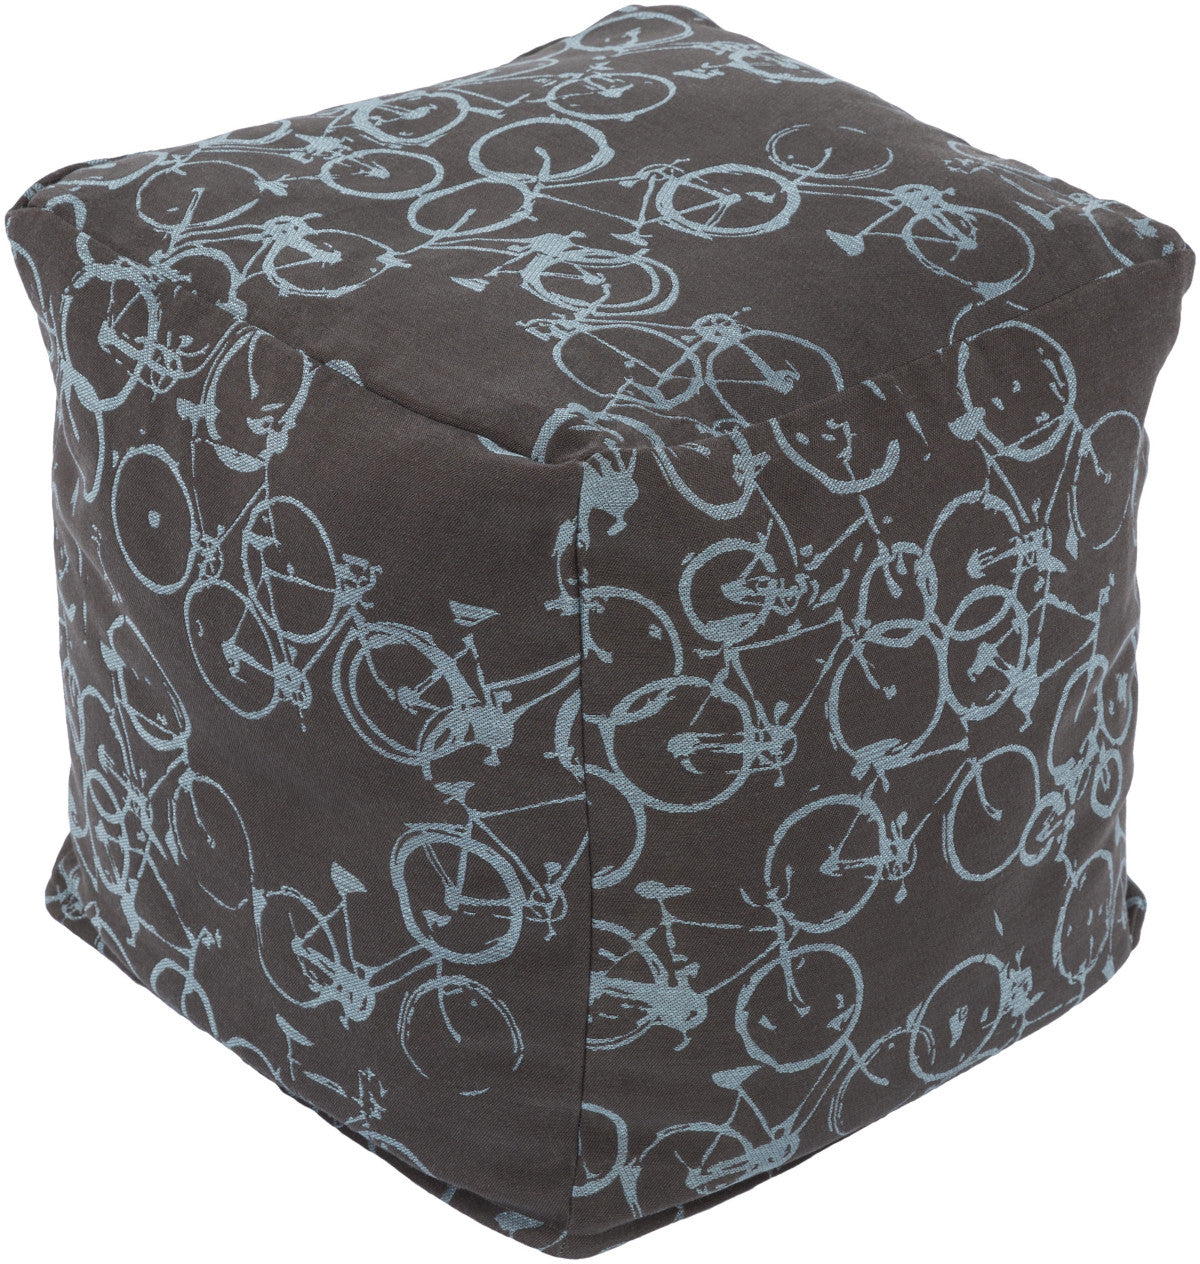 Surya Peddle Power PDPF-001 Brown Pouf by Mike Farrell